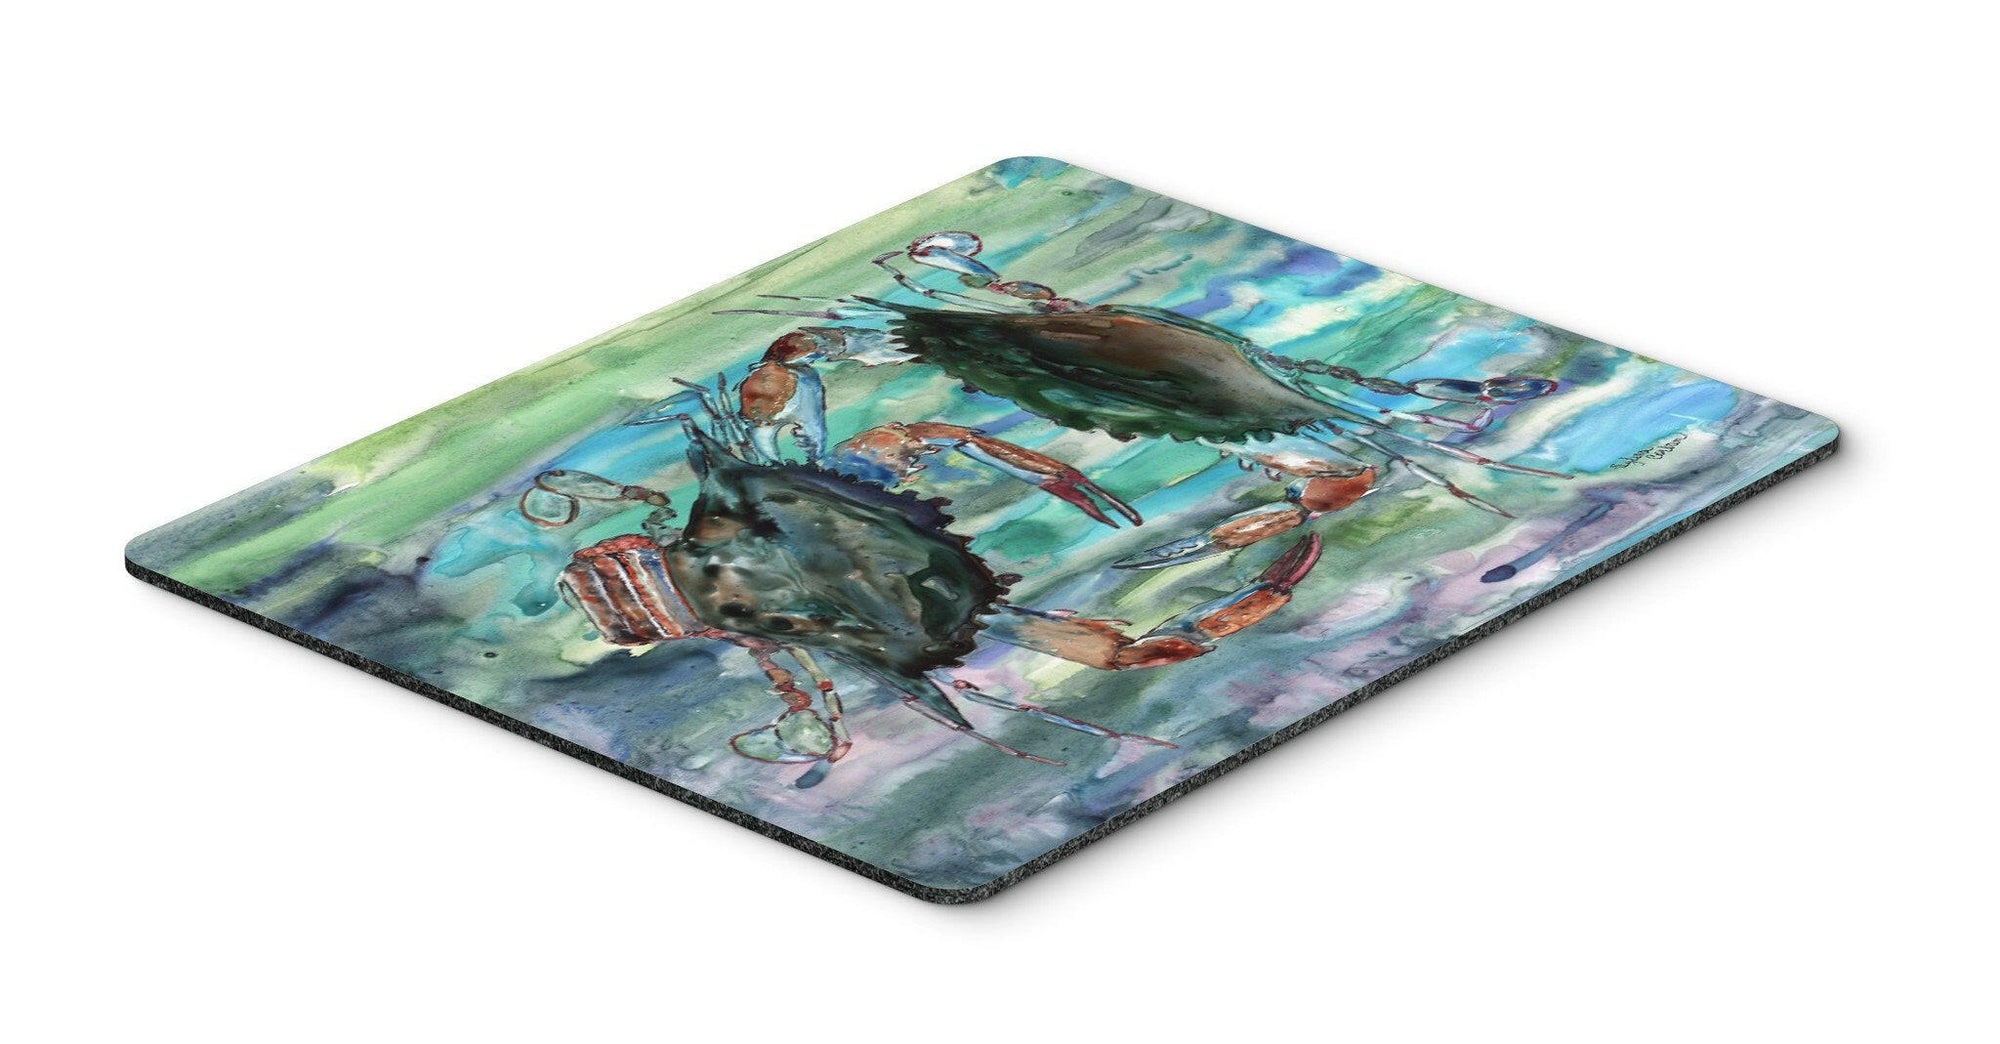 Watery Teal and Purple Crabs Mouse Pad, Hot Pad or Trivet 8954MP by Caroline's Treasures